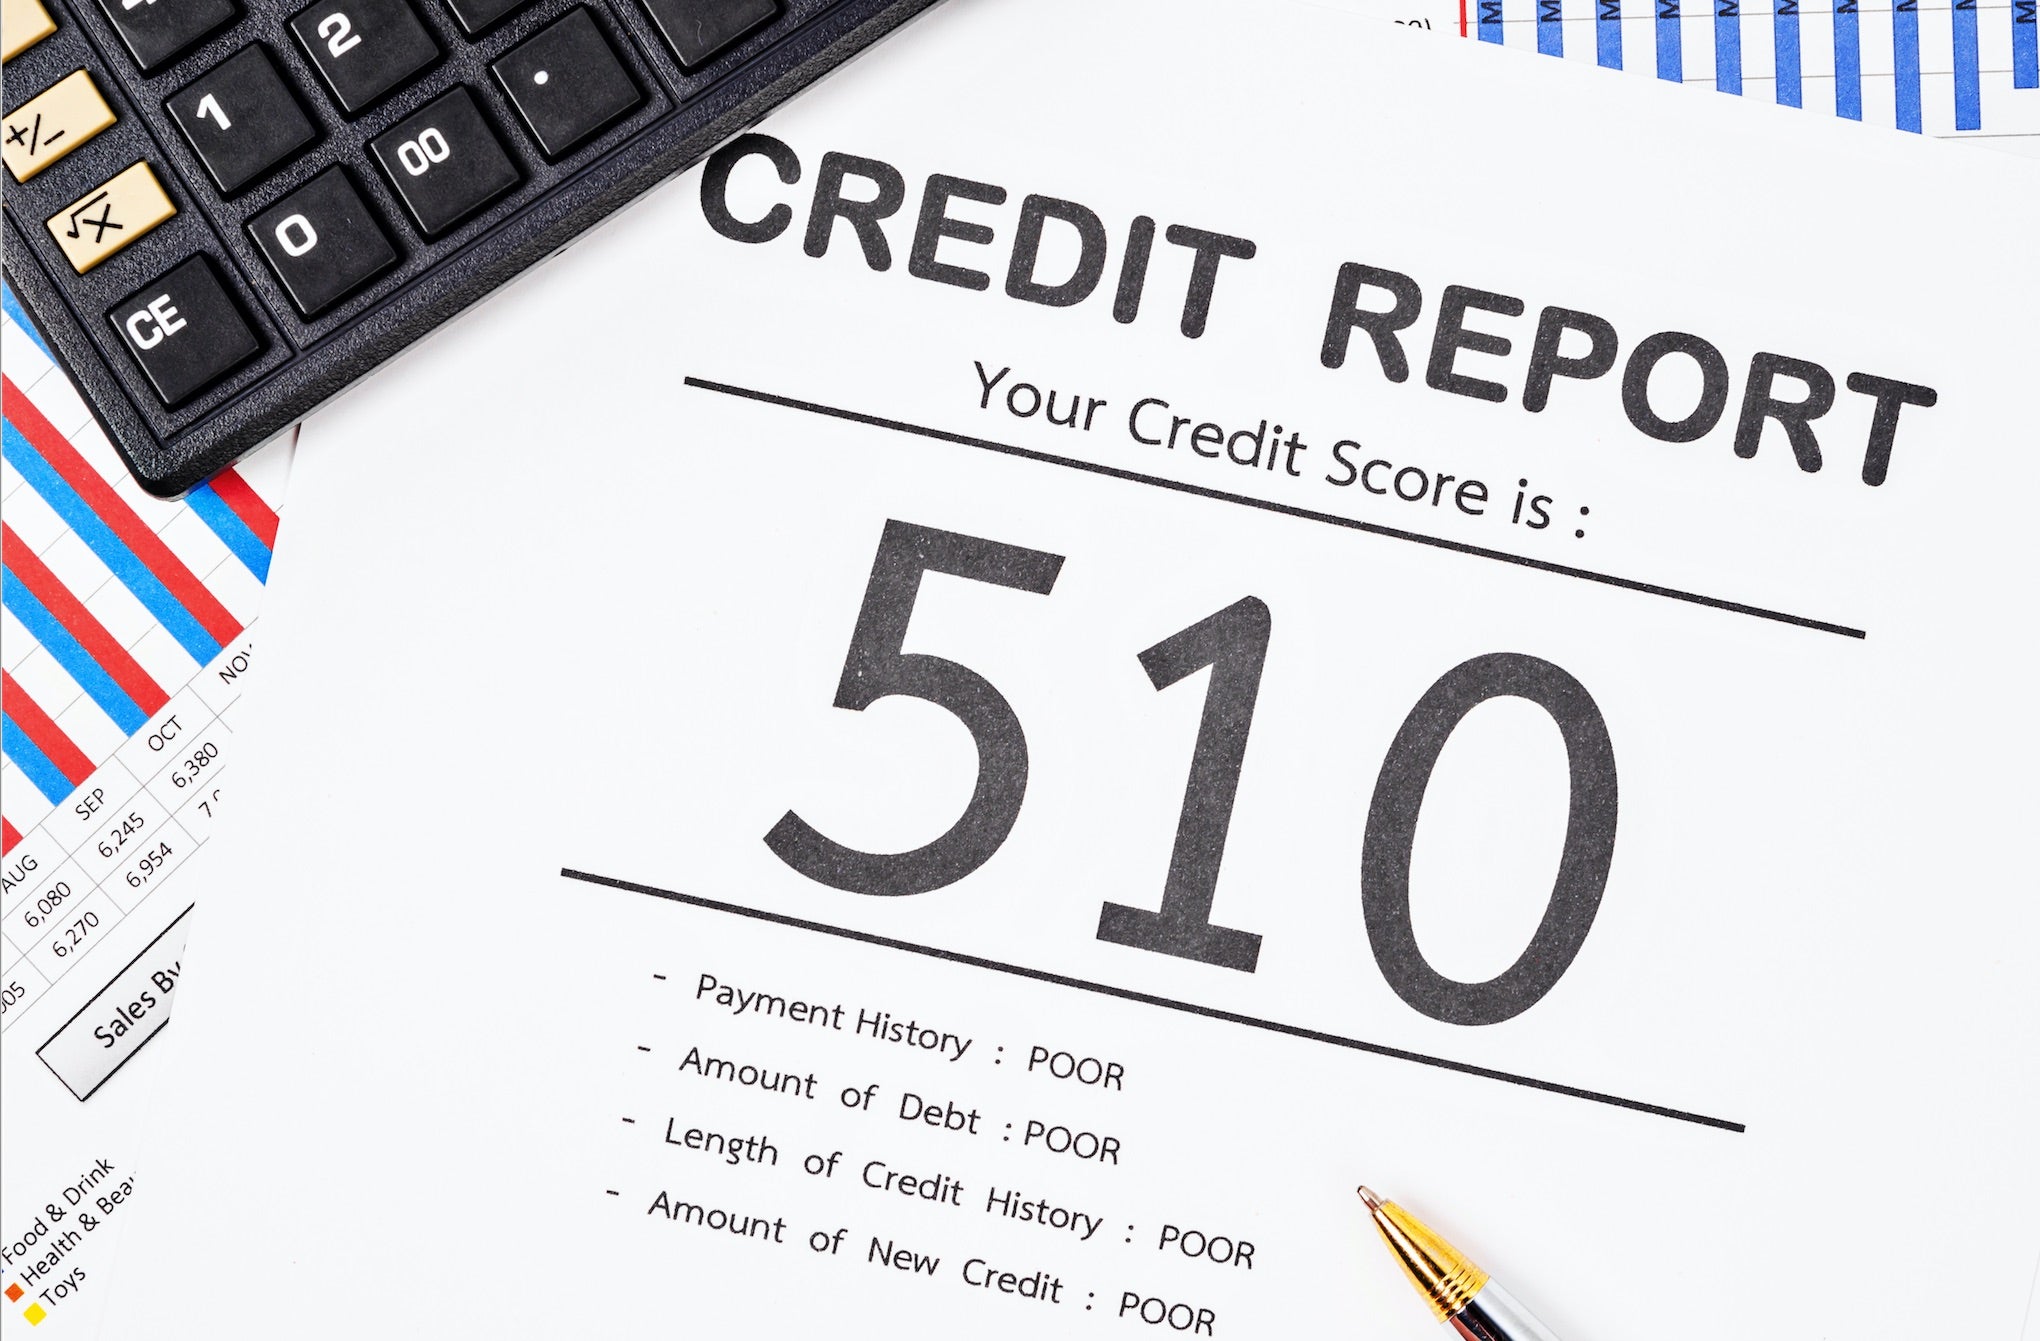 Why Did My Credit Score Drop?